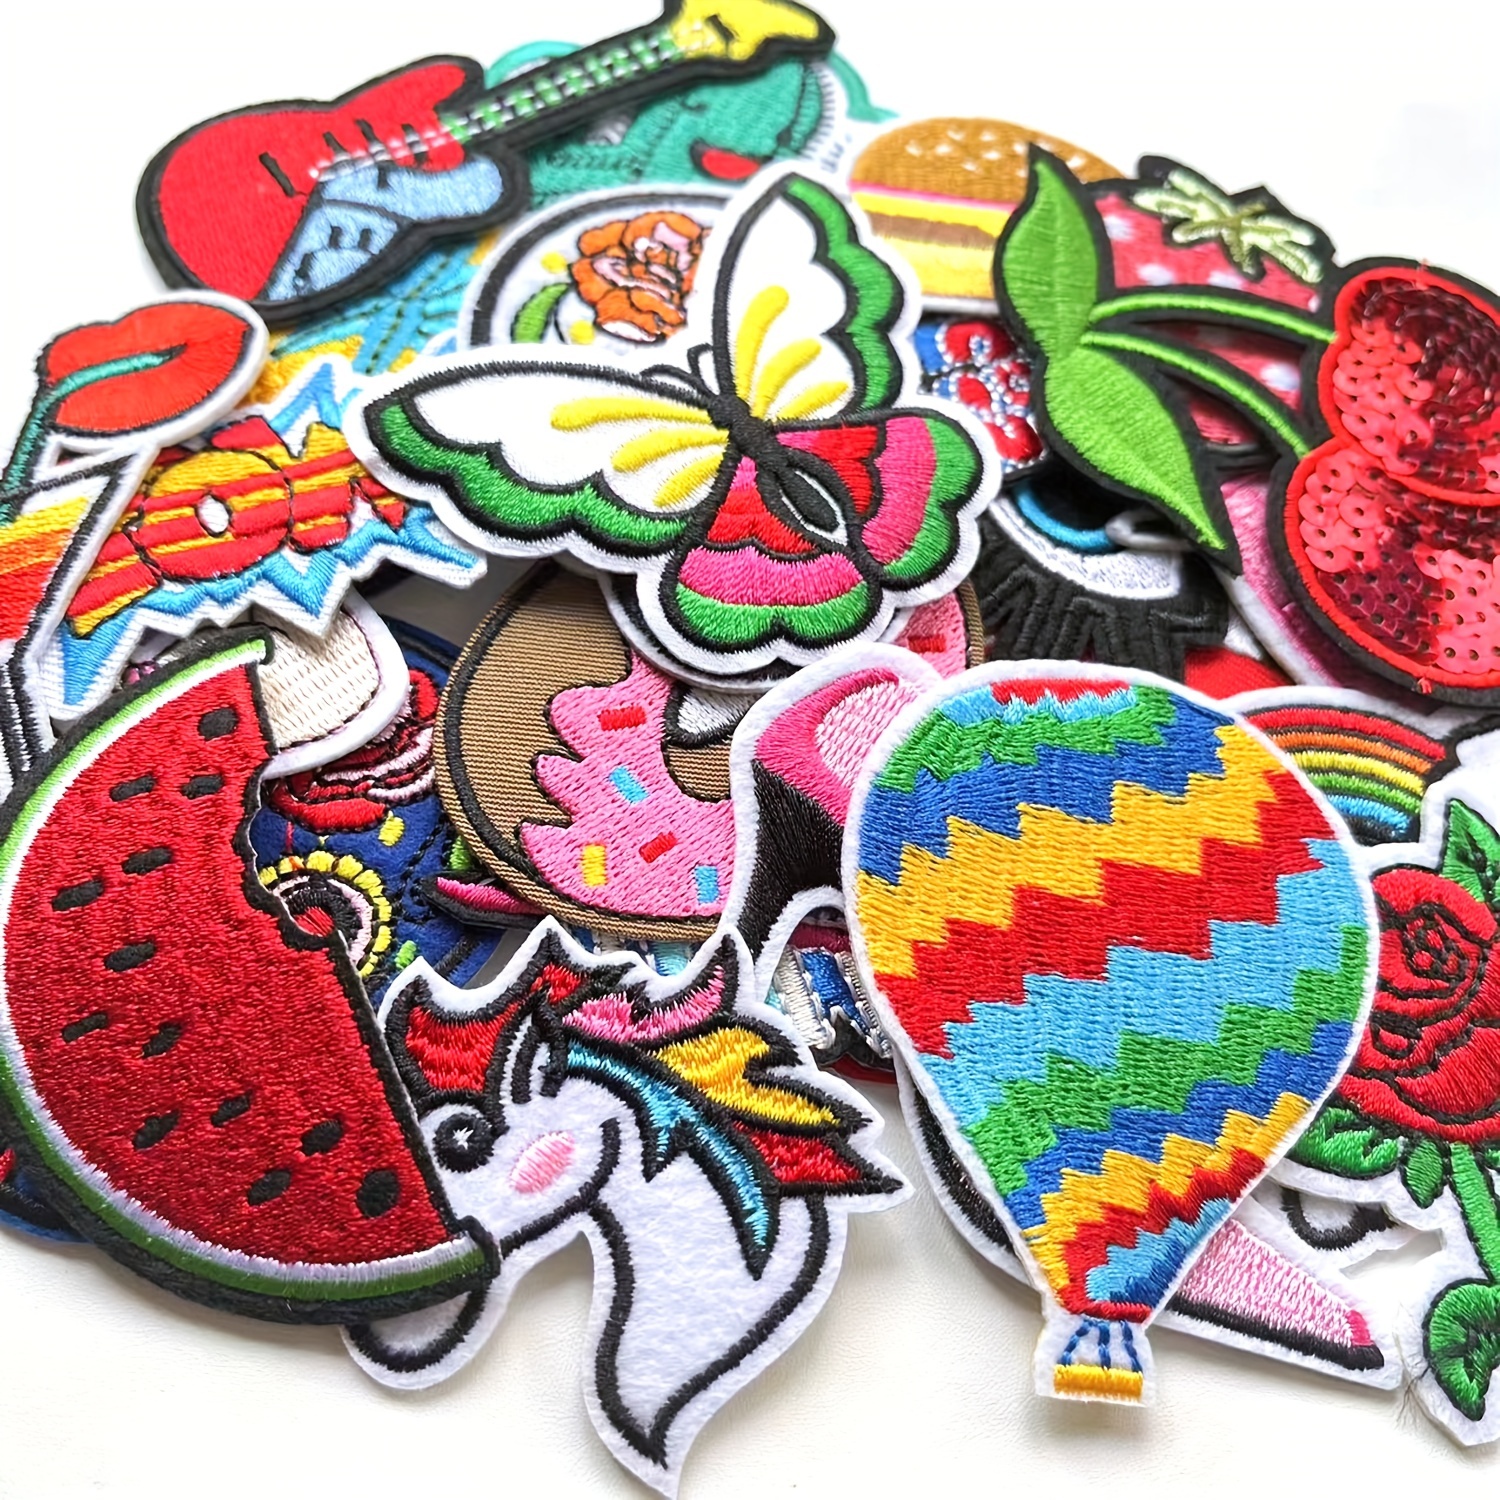 J.CARP 60pcs Random Assorted Styles Embroidered Patches, Sew on / Iron on Patches, Applique for Clothes Dress Pants Hats Jeans, Sewing Flowers